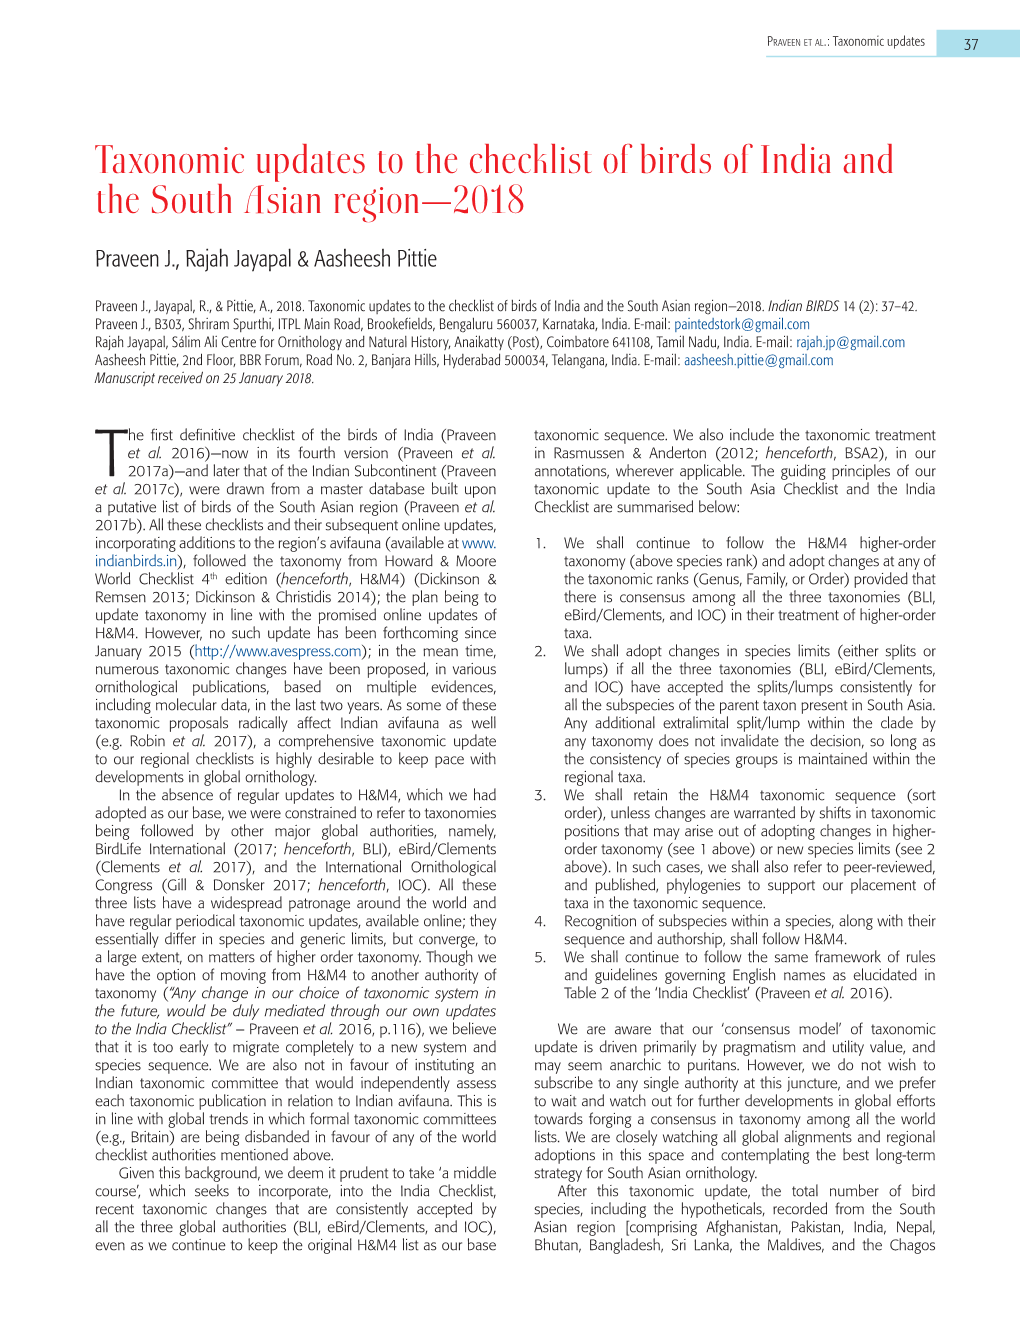 Taxonomic Updates to the Checklist of Birds of India and the South Asian Region—2018